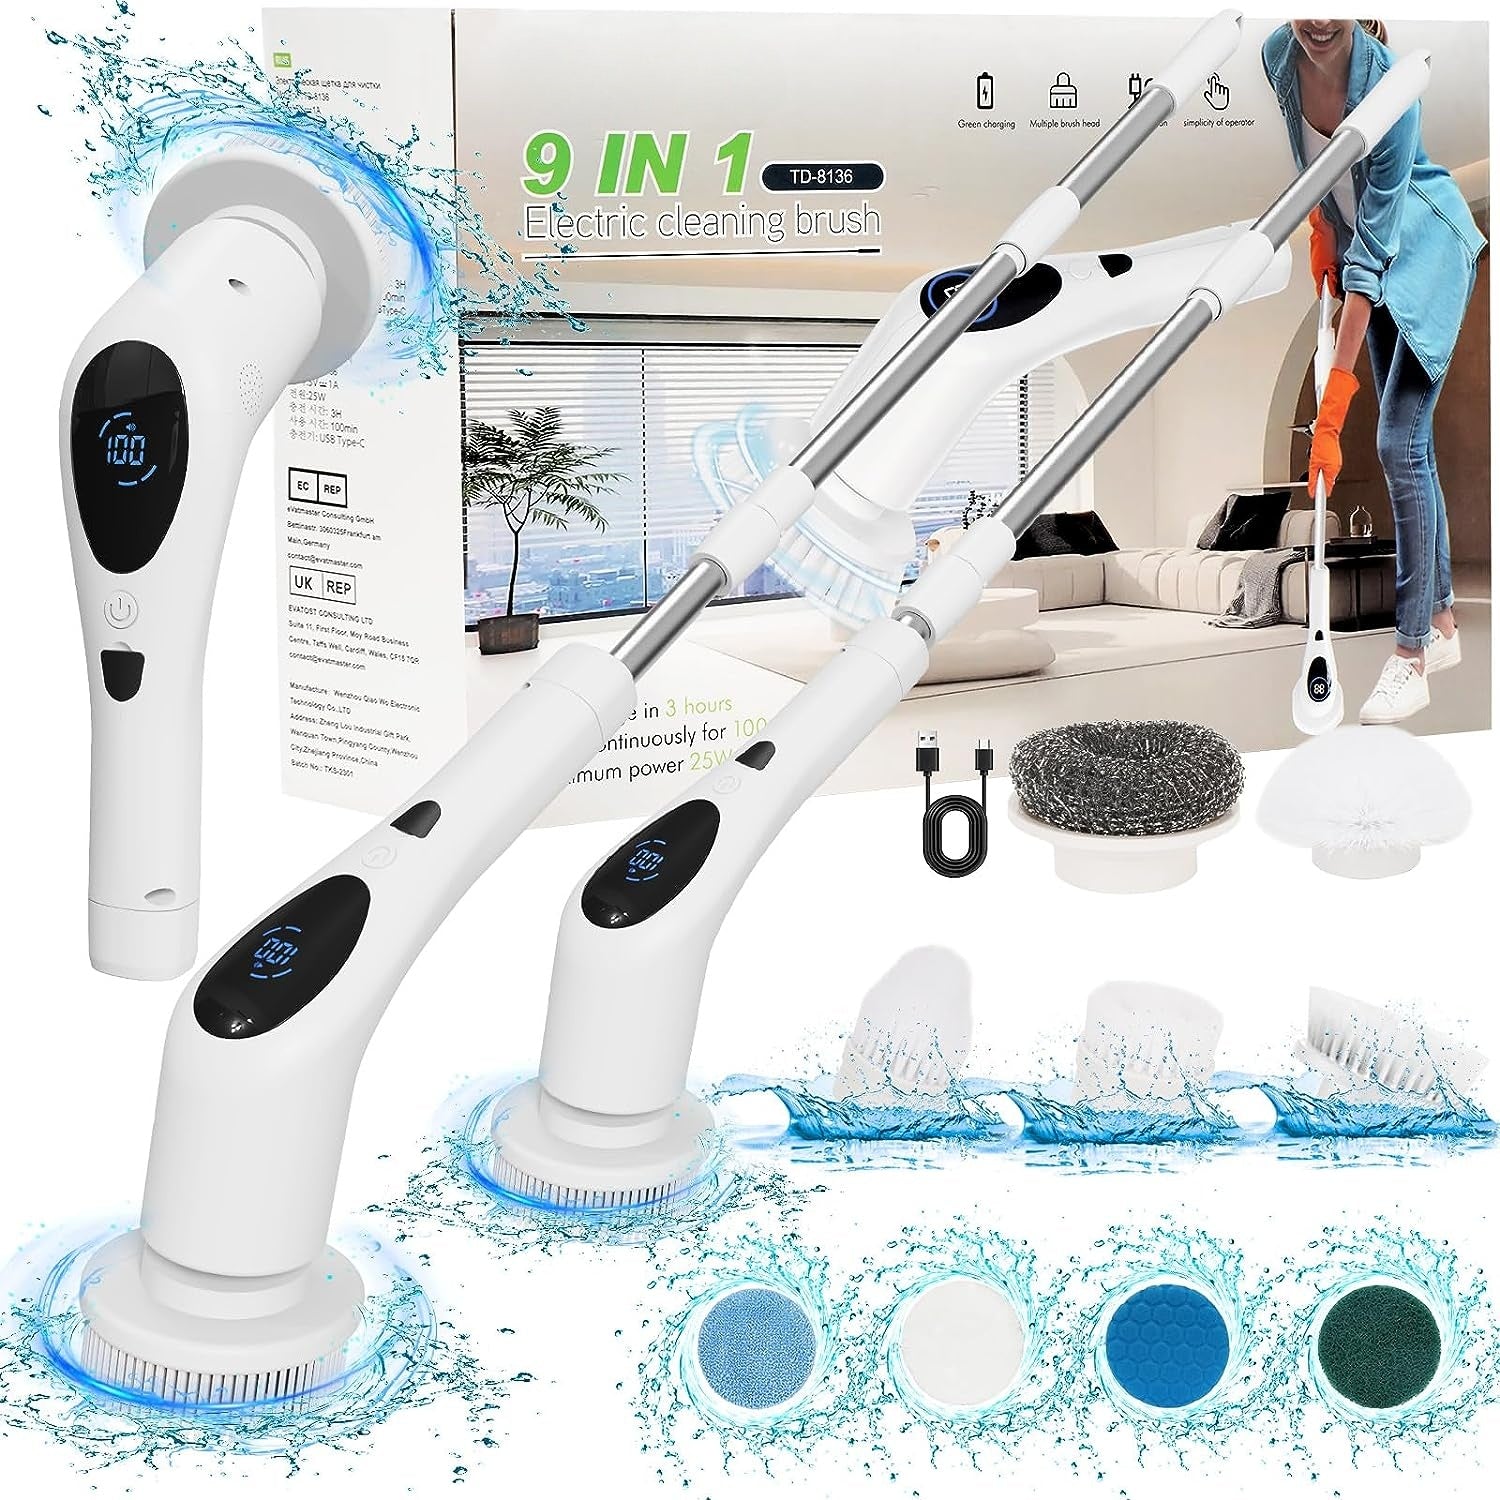 Leebein Electric Spin Scrubber, Cordless Cleaning Brush with 8 Replaceable  Brush Heads, Adjustable Extension Handle, 2 Speeds & Remote Control,Power Cleaning  Brush for Bathroom